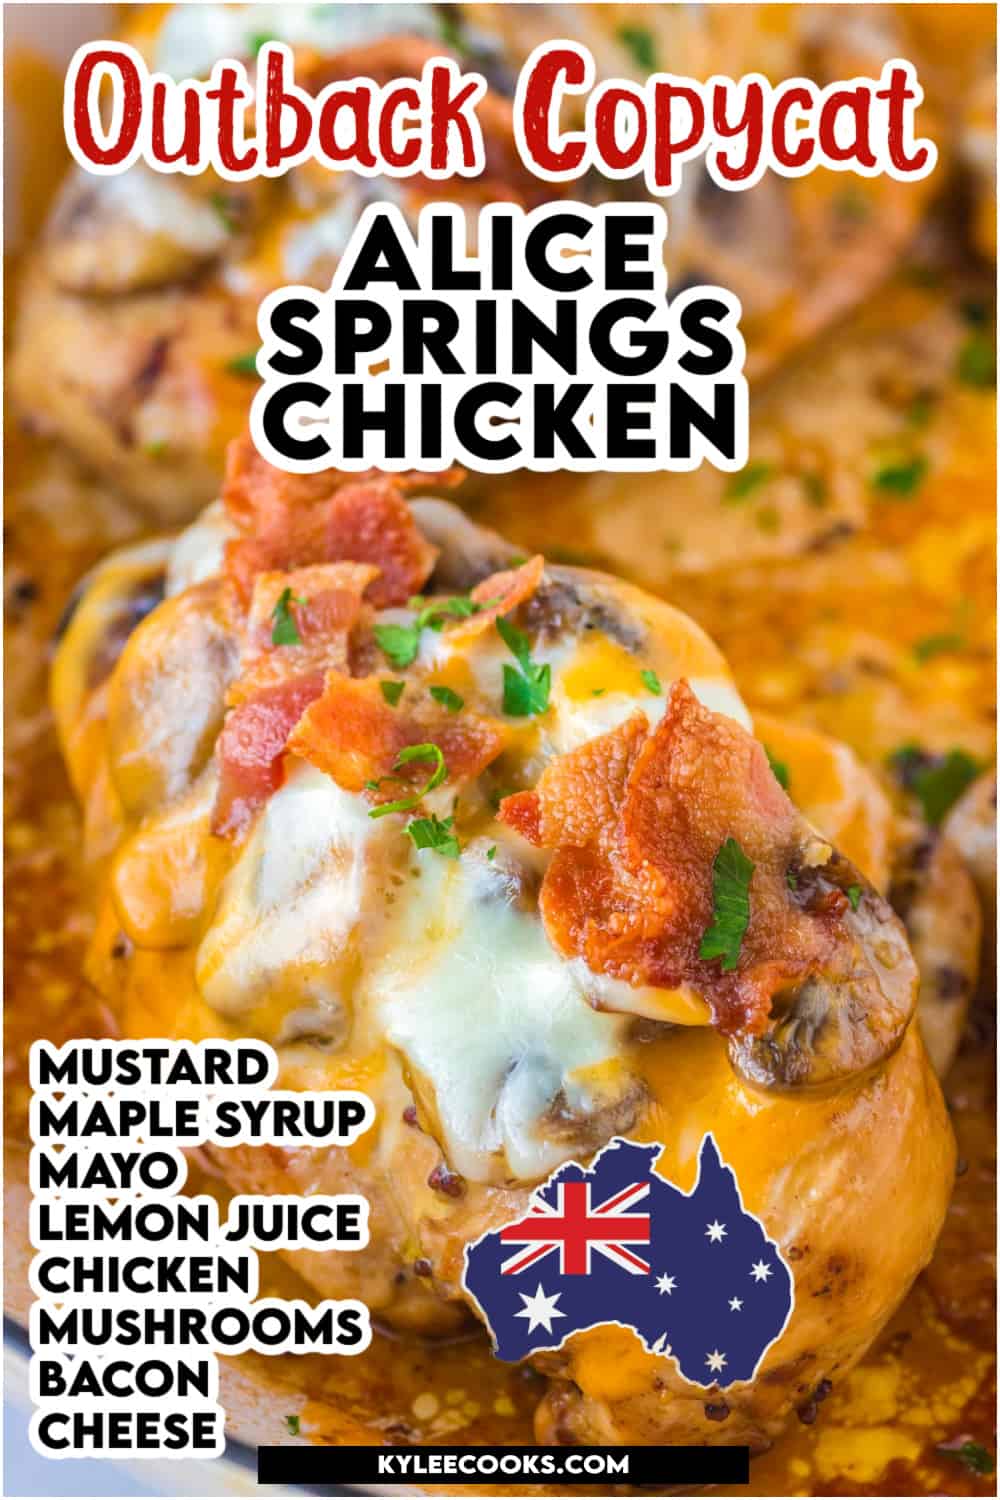 alice springs chicken in a skillet with recipe name and ingredients overlaid in text.